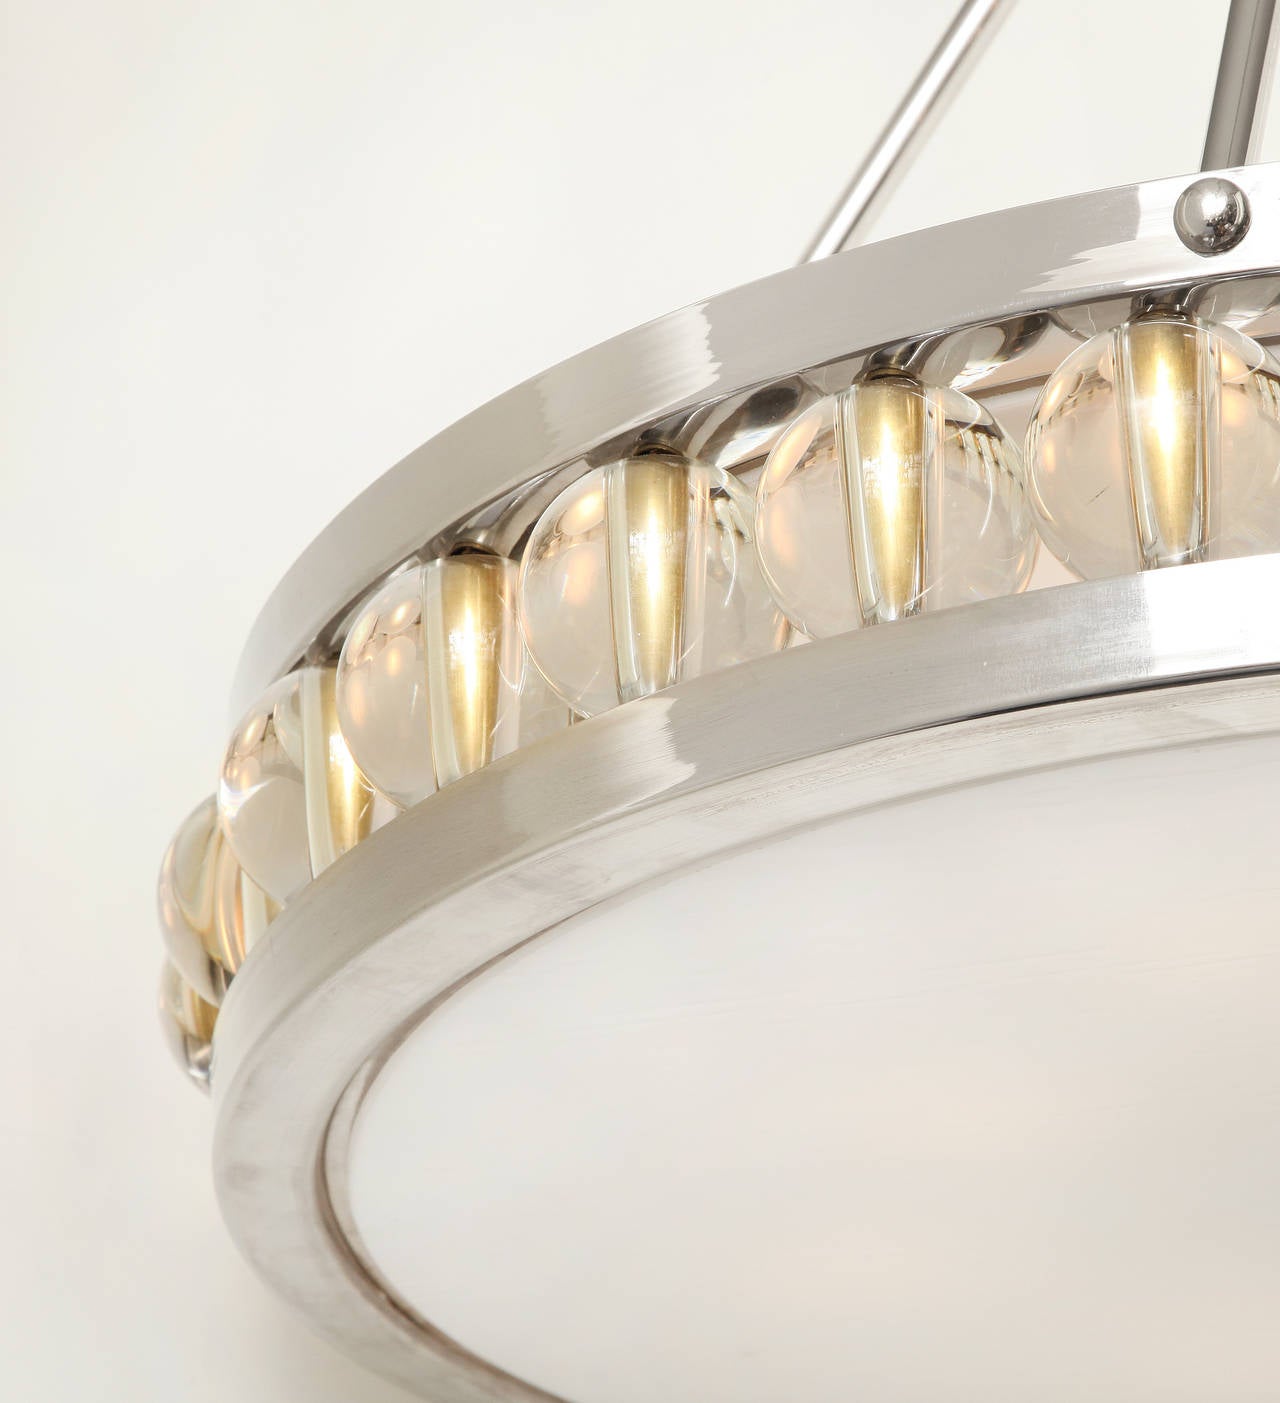 A large round polished nickel pendant ceiling fixture suspended from four rods and canopy, 24